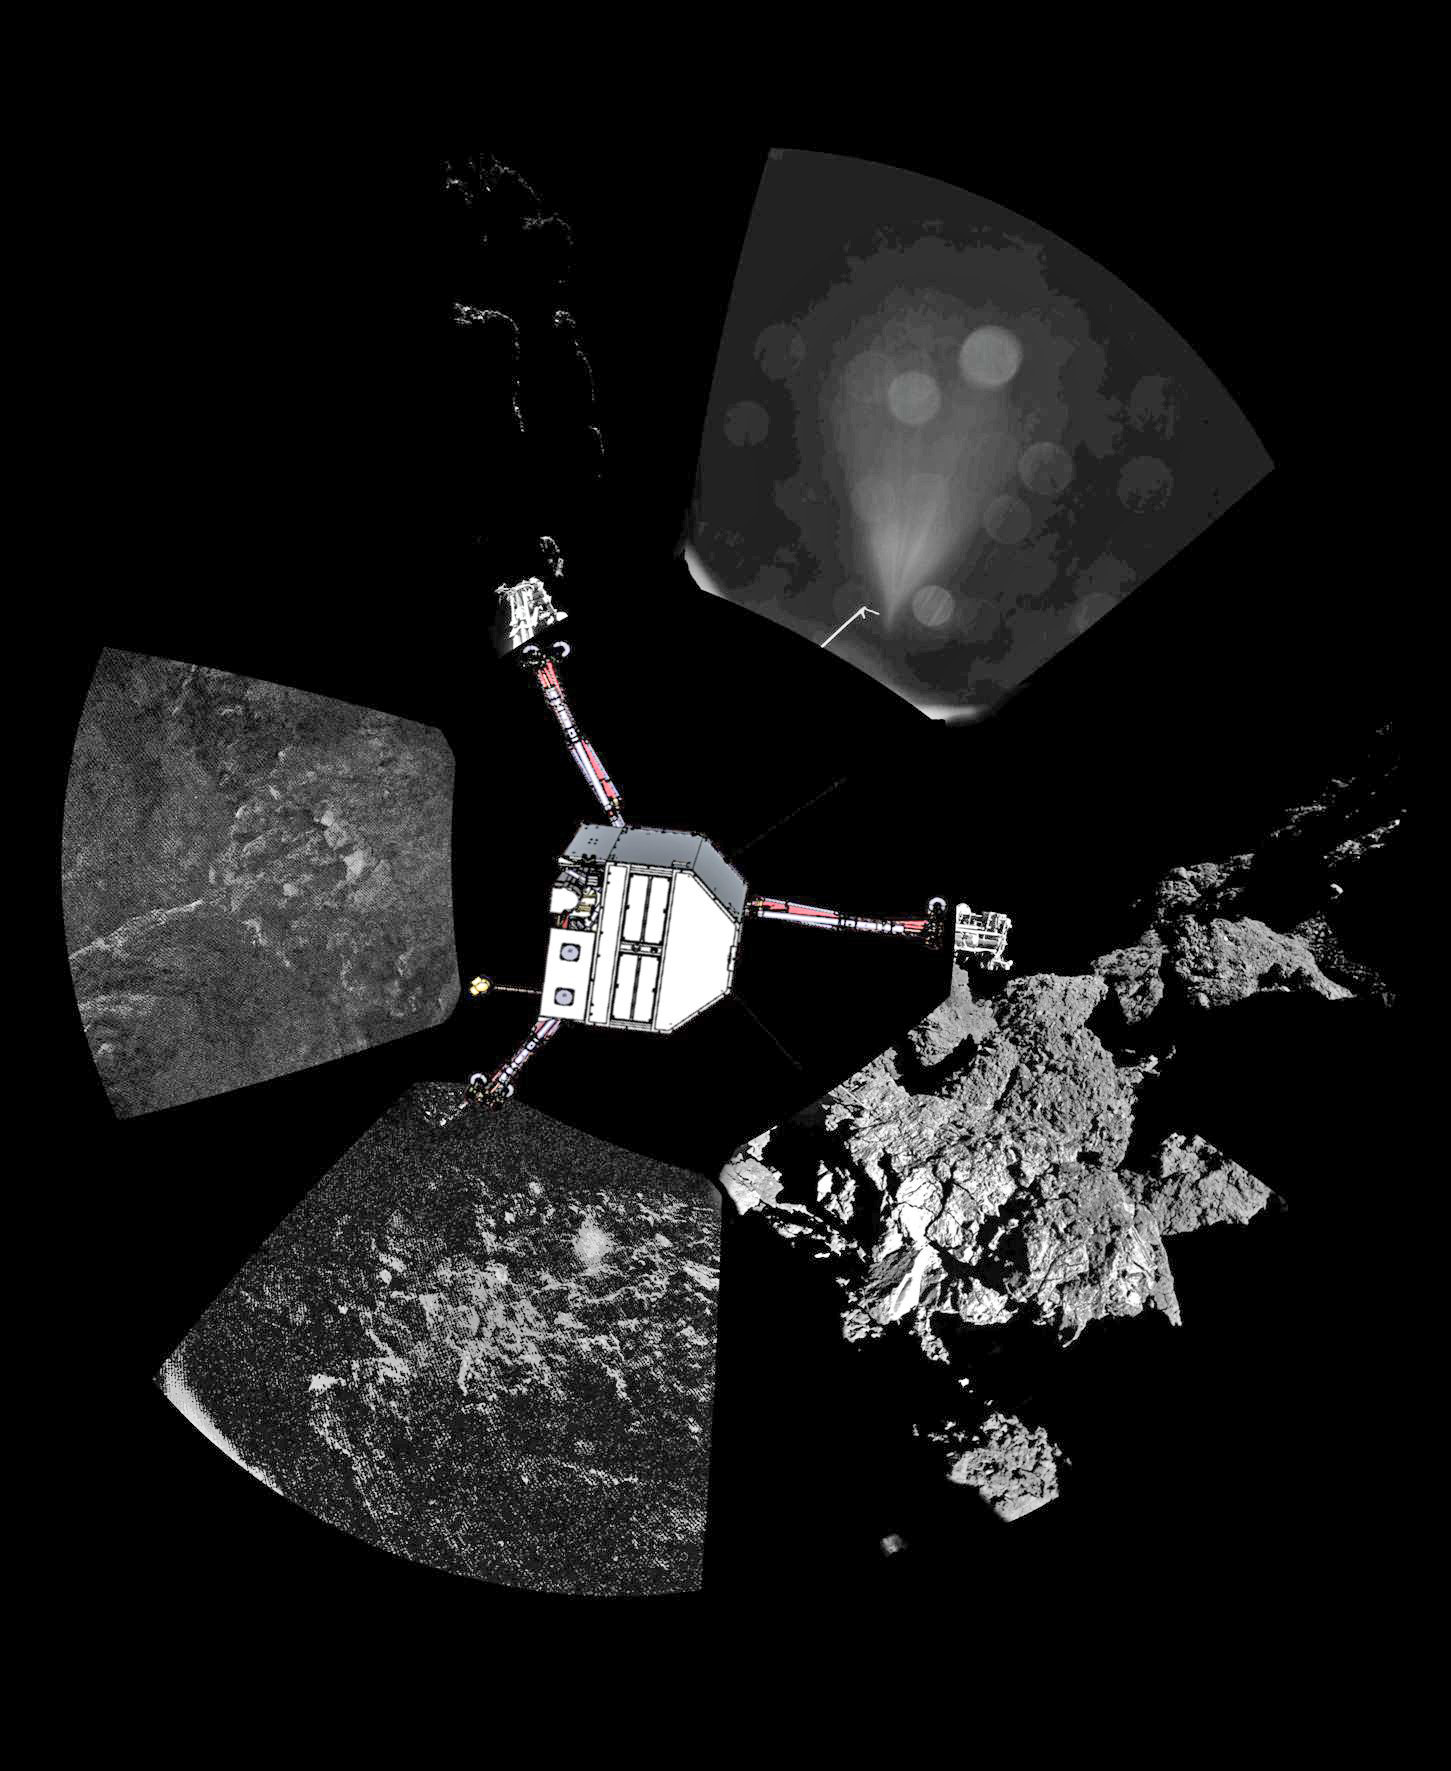 Rosetta’s lander Philae has returned the first panoramic image from the surface of a comet. The view as it has been captured by the CIVA-P imaging system, shows a 360º view around the point of final touchdown. The three feet of Philae’s landing gear can be seen in some of the frames.  Superimposed on top of the image is a sketch of the Philae lander in the configuration the lander team currently believe it is in.  The view has been processed to show further details.   Credit: ESA/Rosetta/Philae/CIVA. Post processing: Ken Kremer/Marco Di Lorenzo